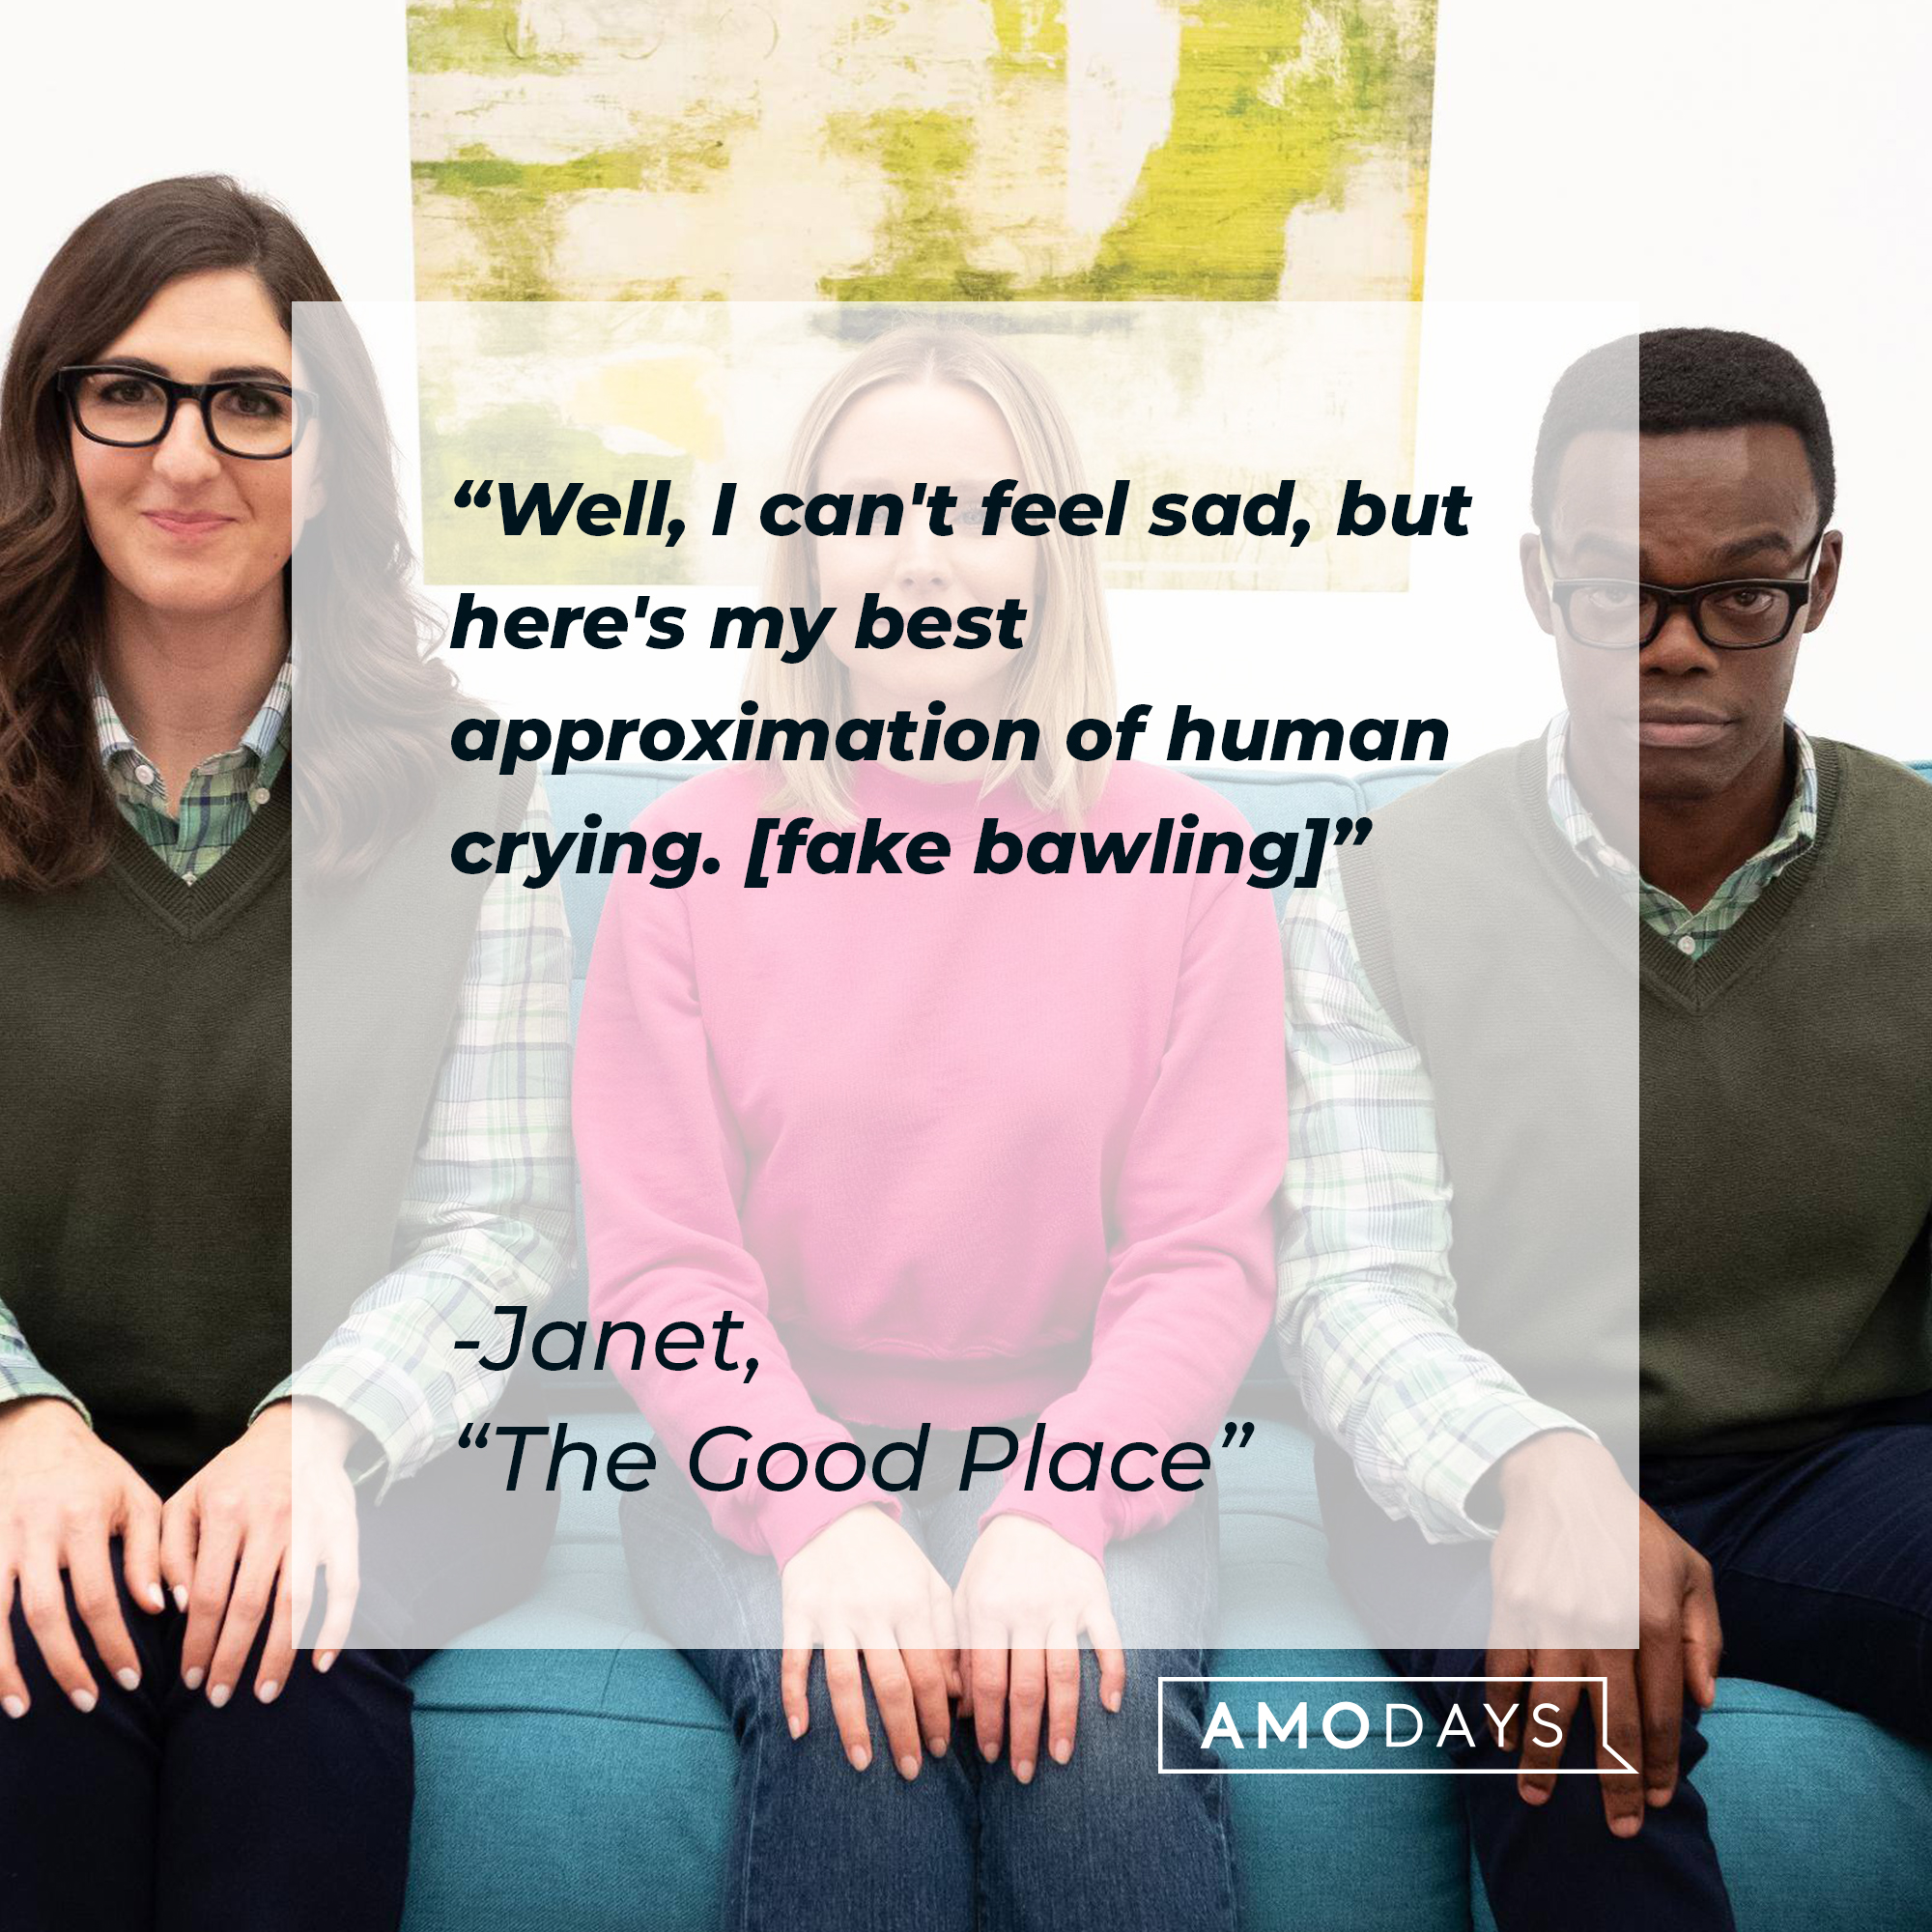 Janet's quote: "Well, I can't feel sad, but here's my best approximation of human crying. [fake bawling]" | Source: facebook.com/NBCTheGoodPlace